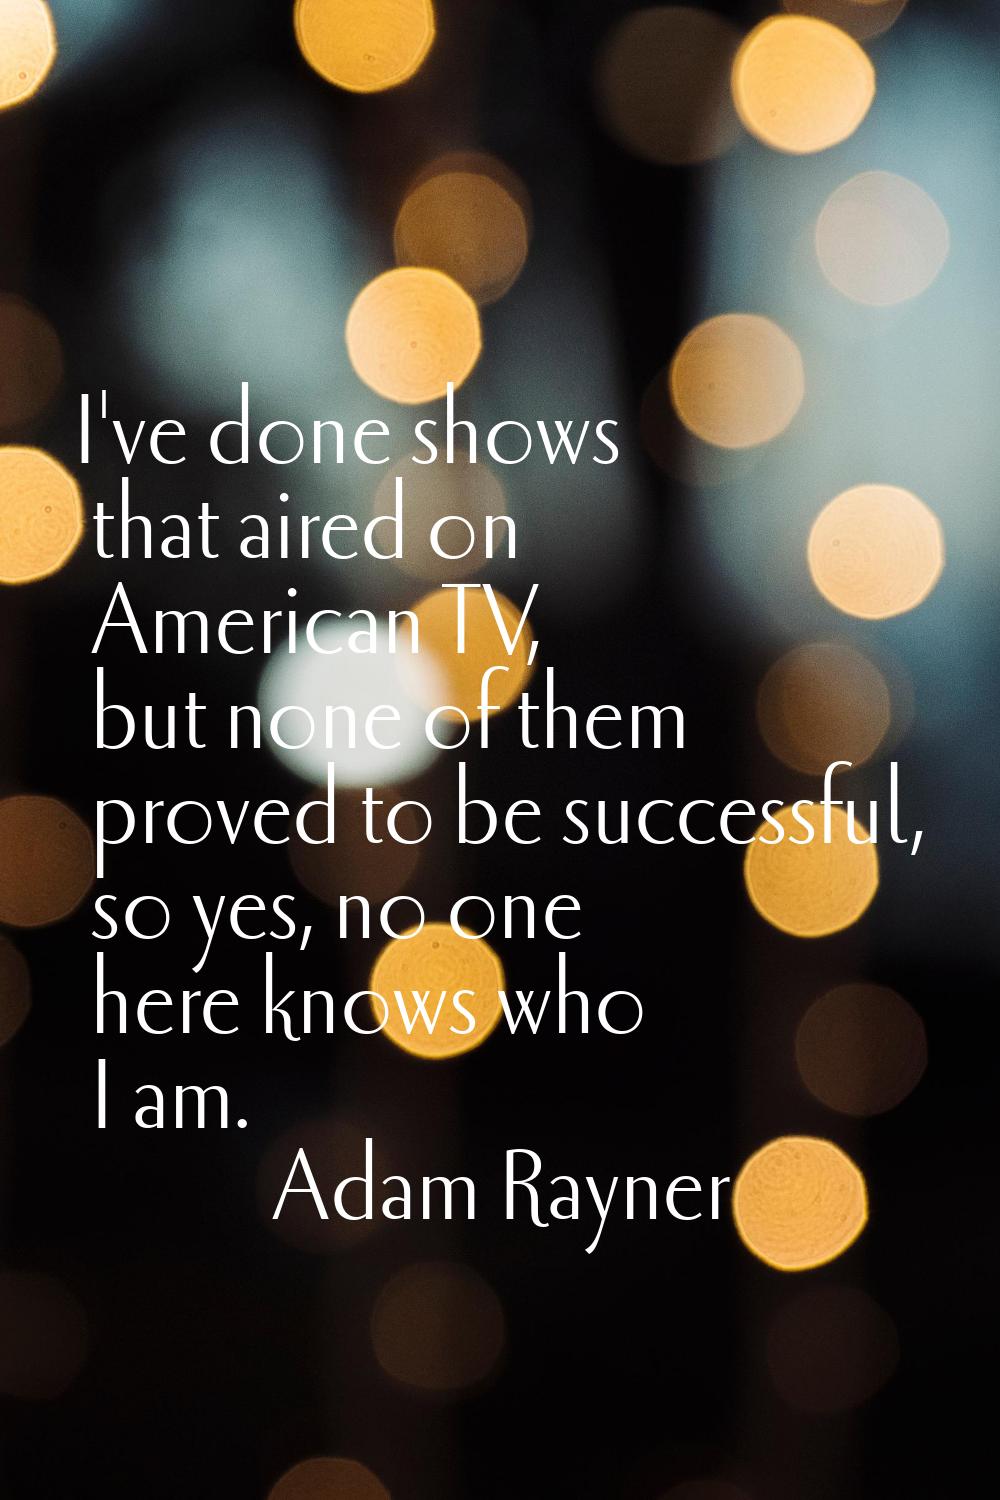 I've done shows that aired on American TV, but none of them proved to be successful, so yes, no one